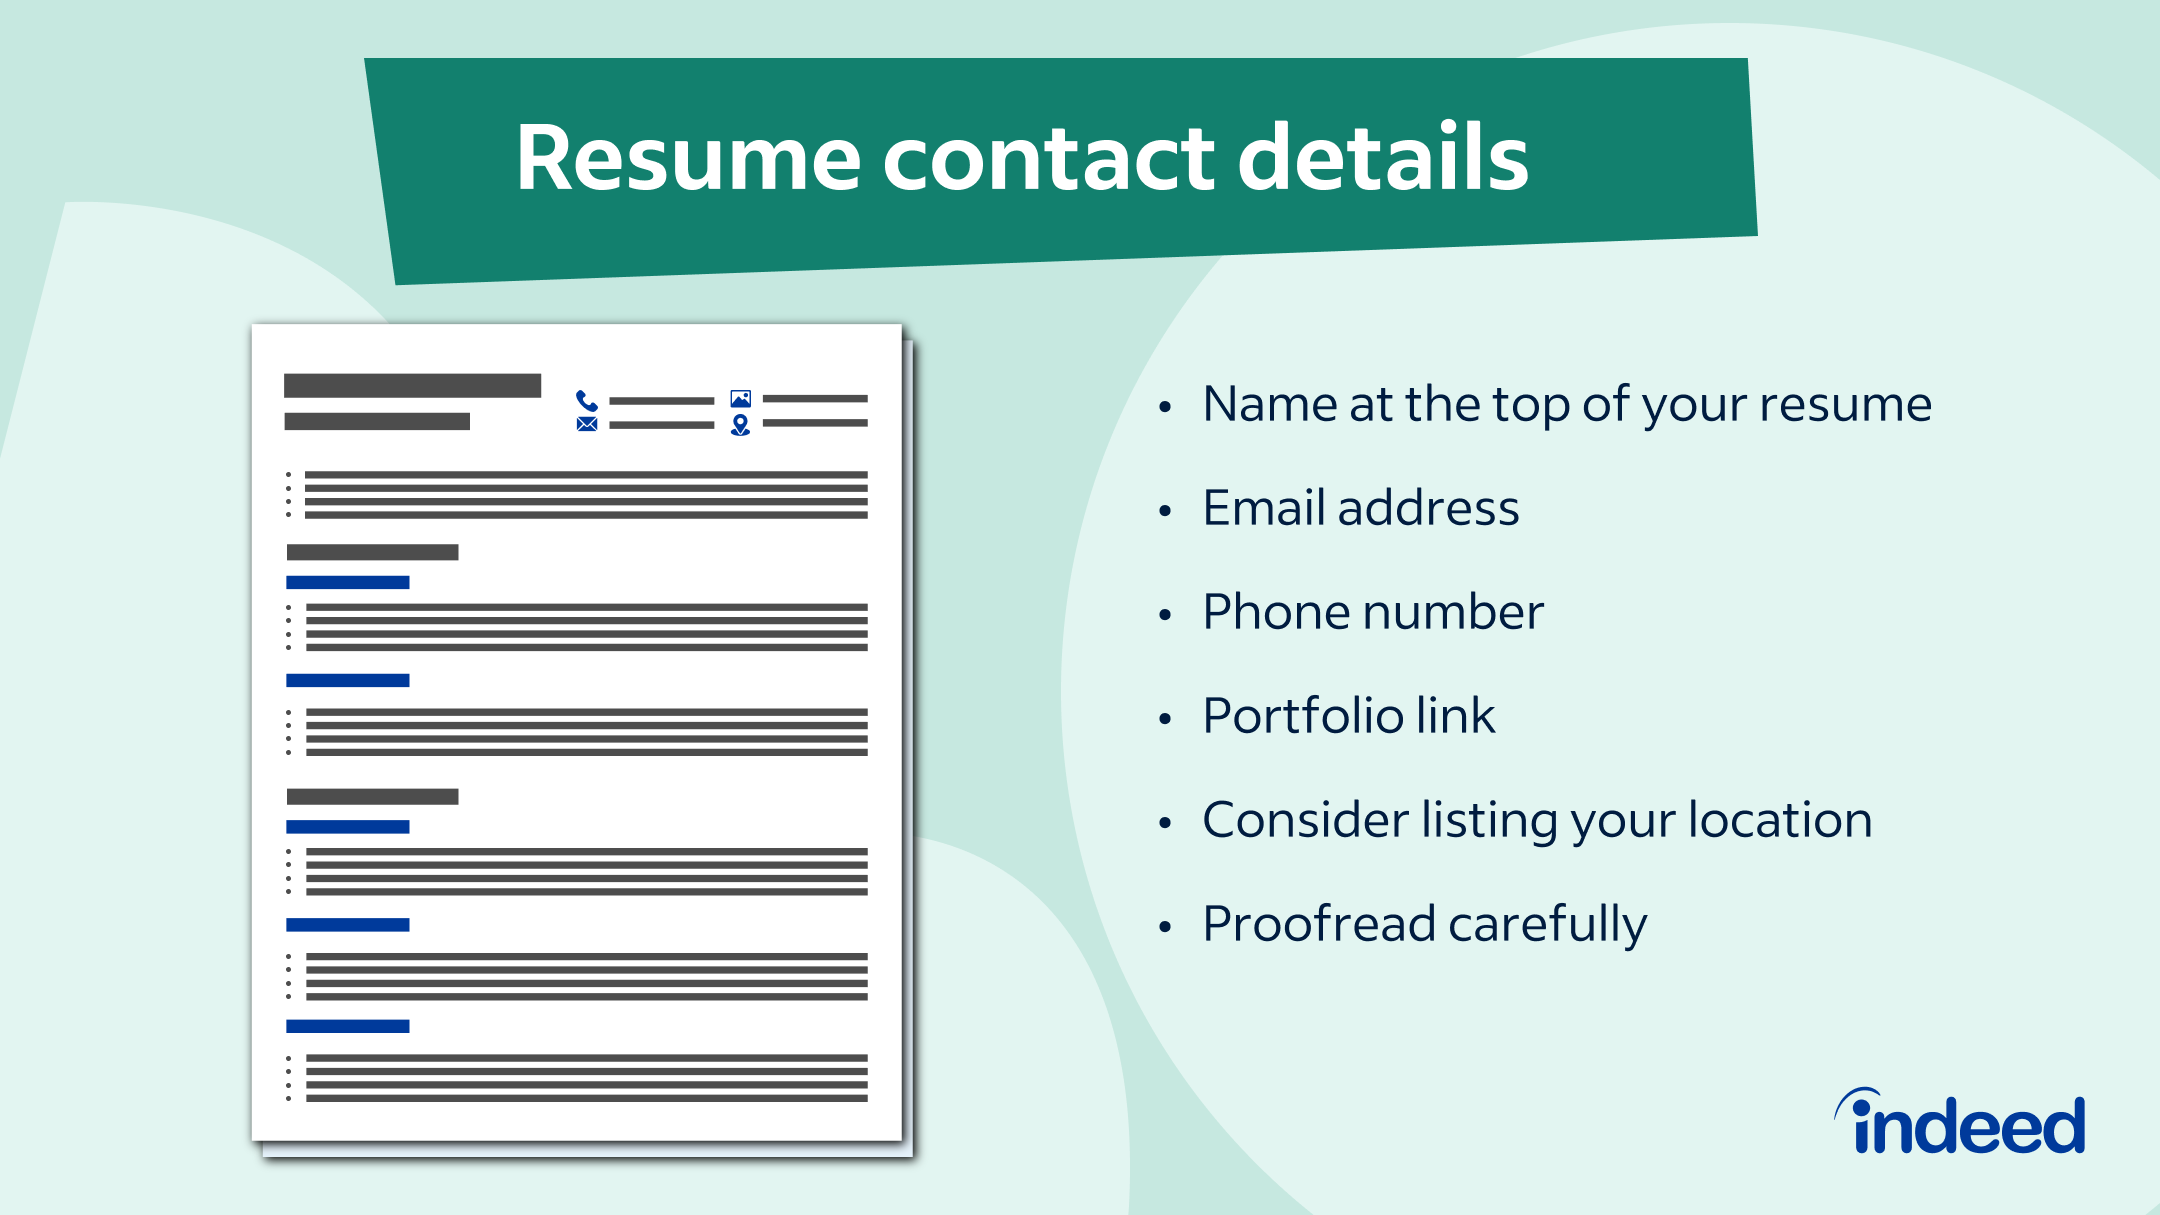 How To Add Contact Information to Your Resume (With Example)